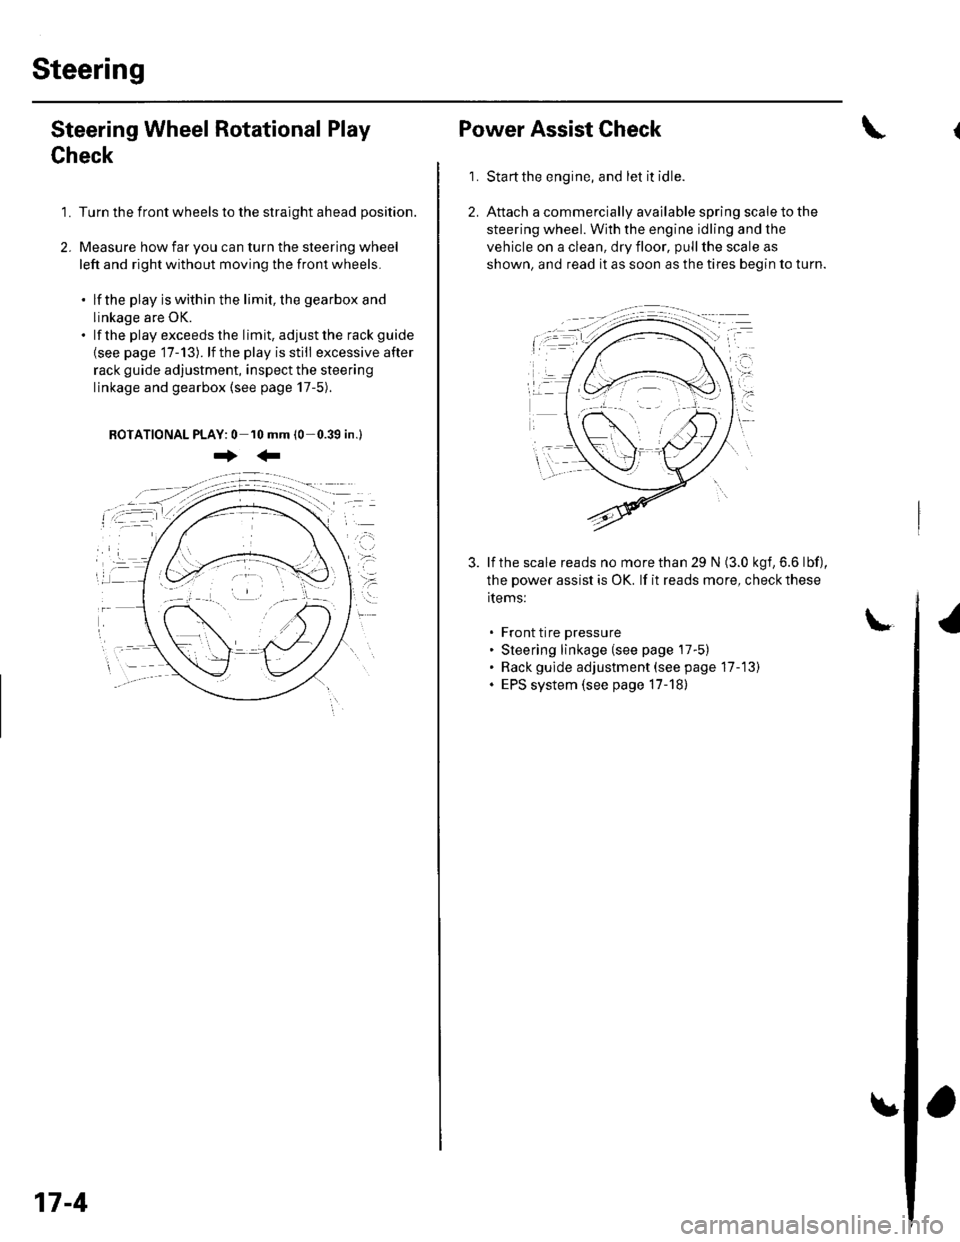 HONDA CIVIC 2003 7.G Workshop Manual Steering
Steering Wheel Rotational Play
Check
1. Turn the front wheels to the straight ahead position.
2. Measure how far you can turn the steering wheel
left and right without moving the front wheels